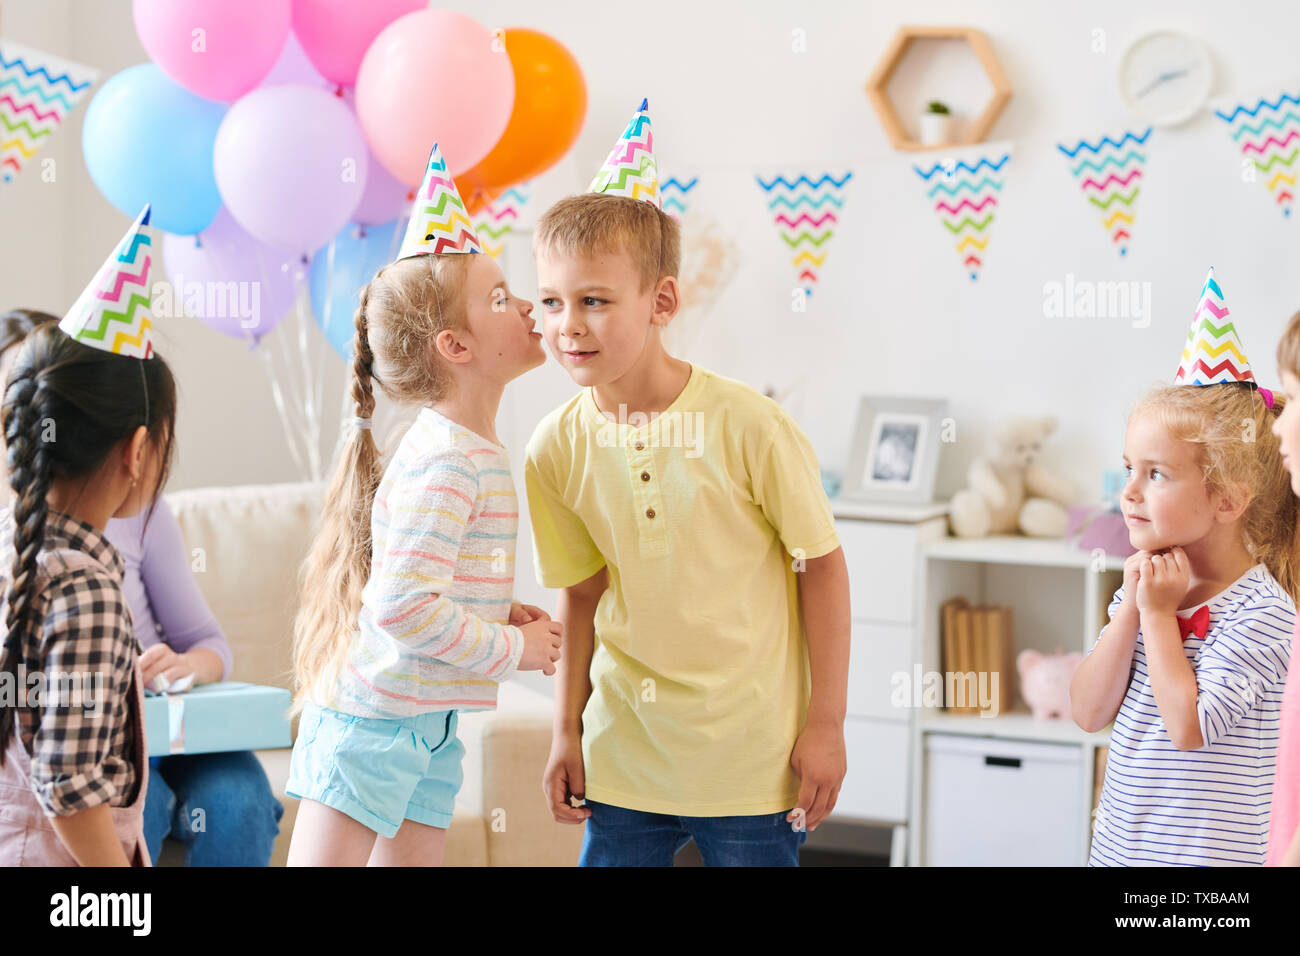 Cute little girl in casualwear whispering something to boy while playing game Stock Photo